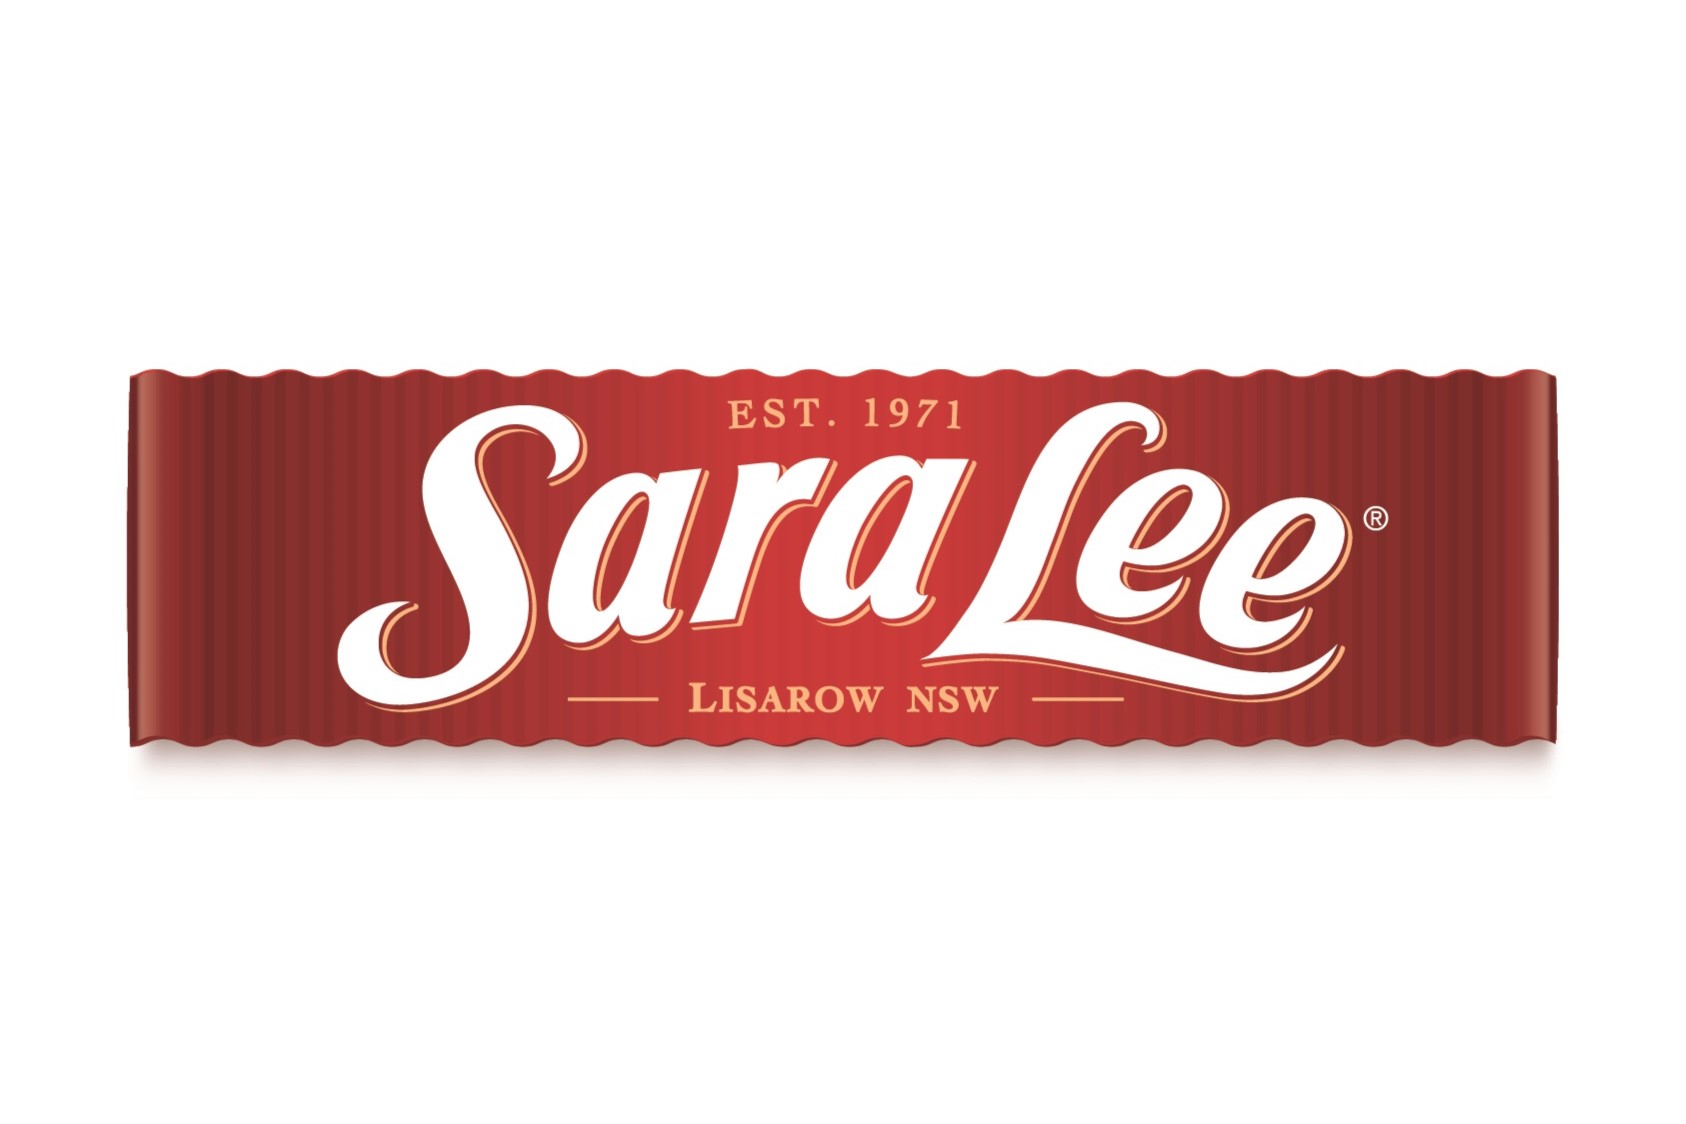 Sara Lee sold after going into voluntary administration - Retail